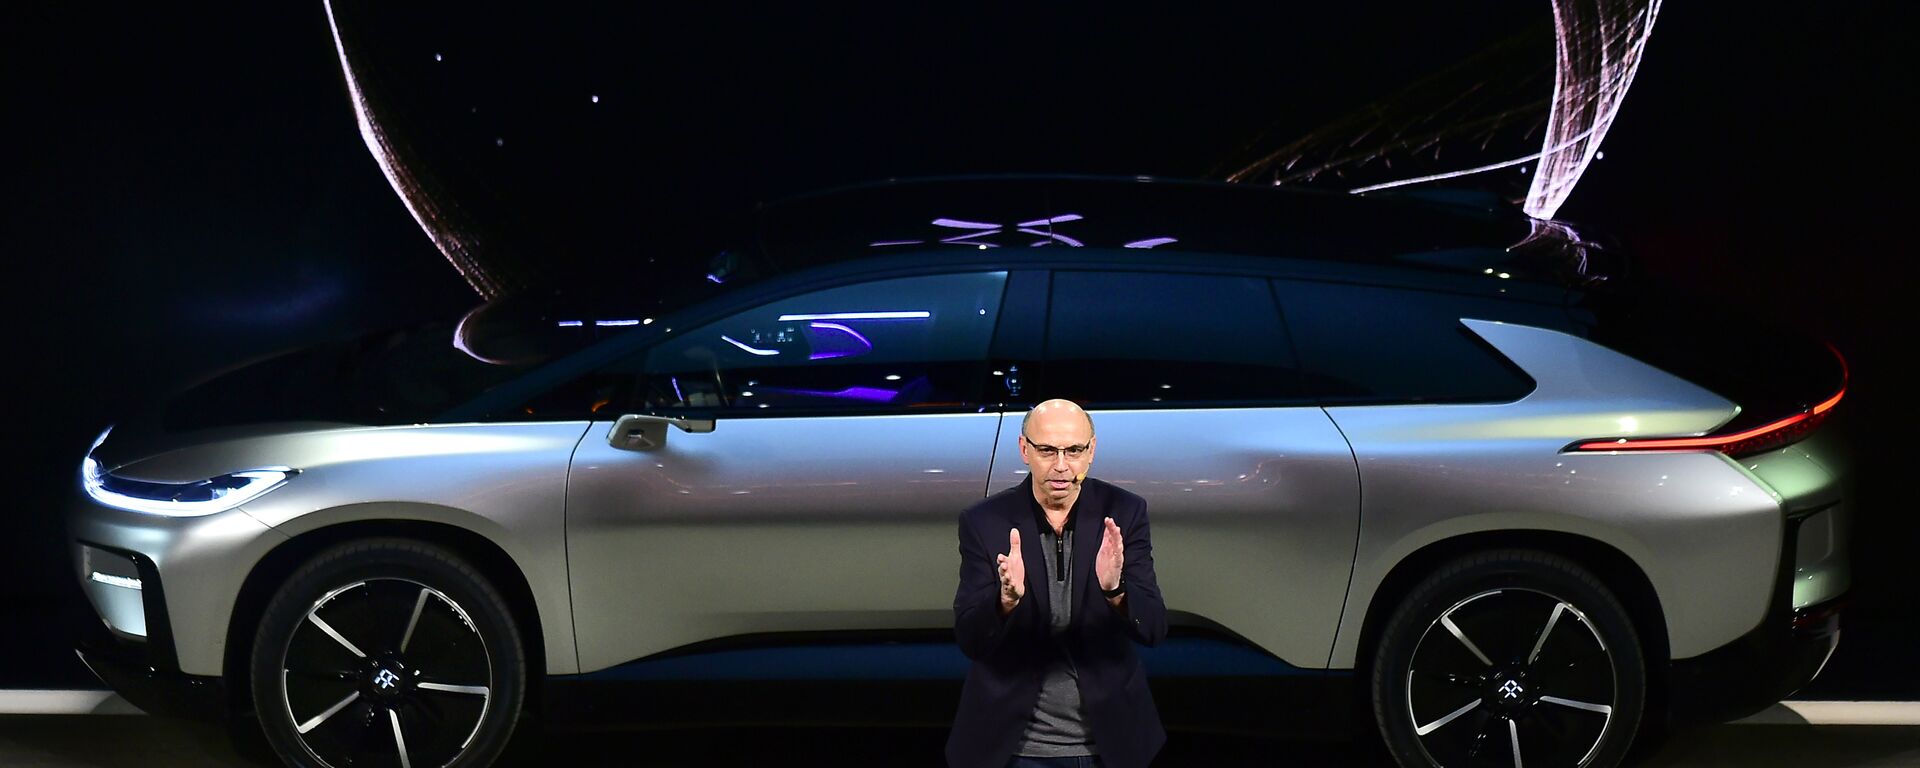 araday Future's Nick Sampson, SVP of R&D + Engineering speaks in front of the just introduced FF91 electric vehicle at the company's press conference at the 2017 Consumer Electronics Show in Las Vegas, January, 2016. - Sputnik International, 1920, 29.11.2023